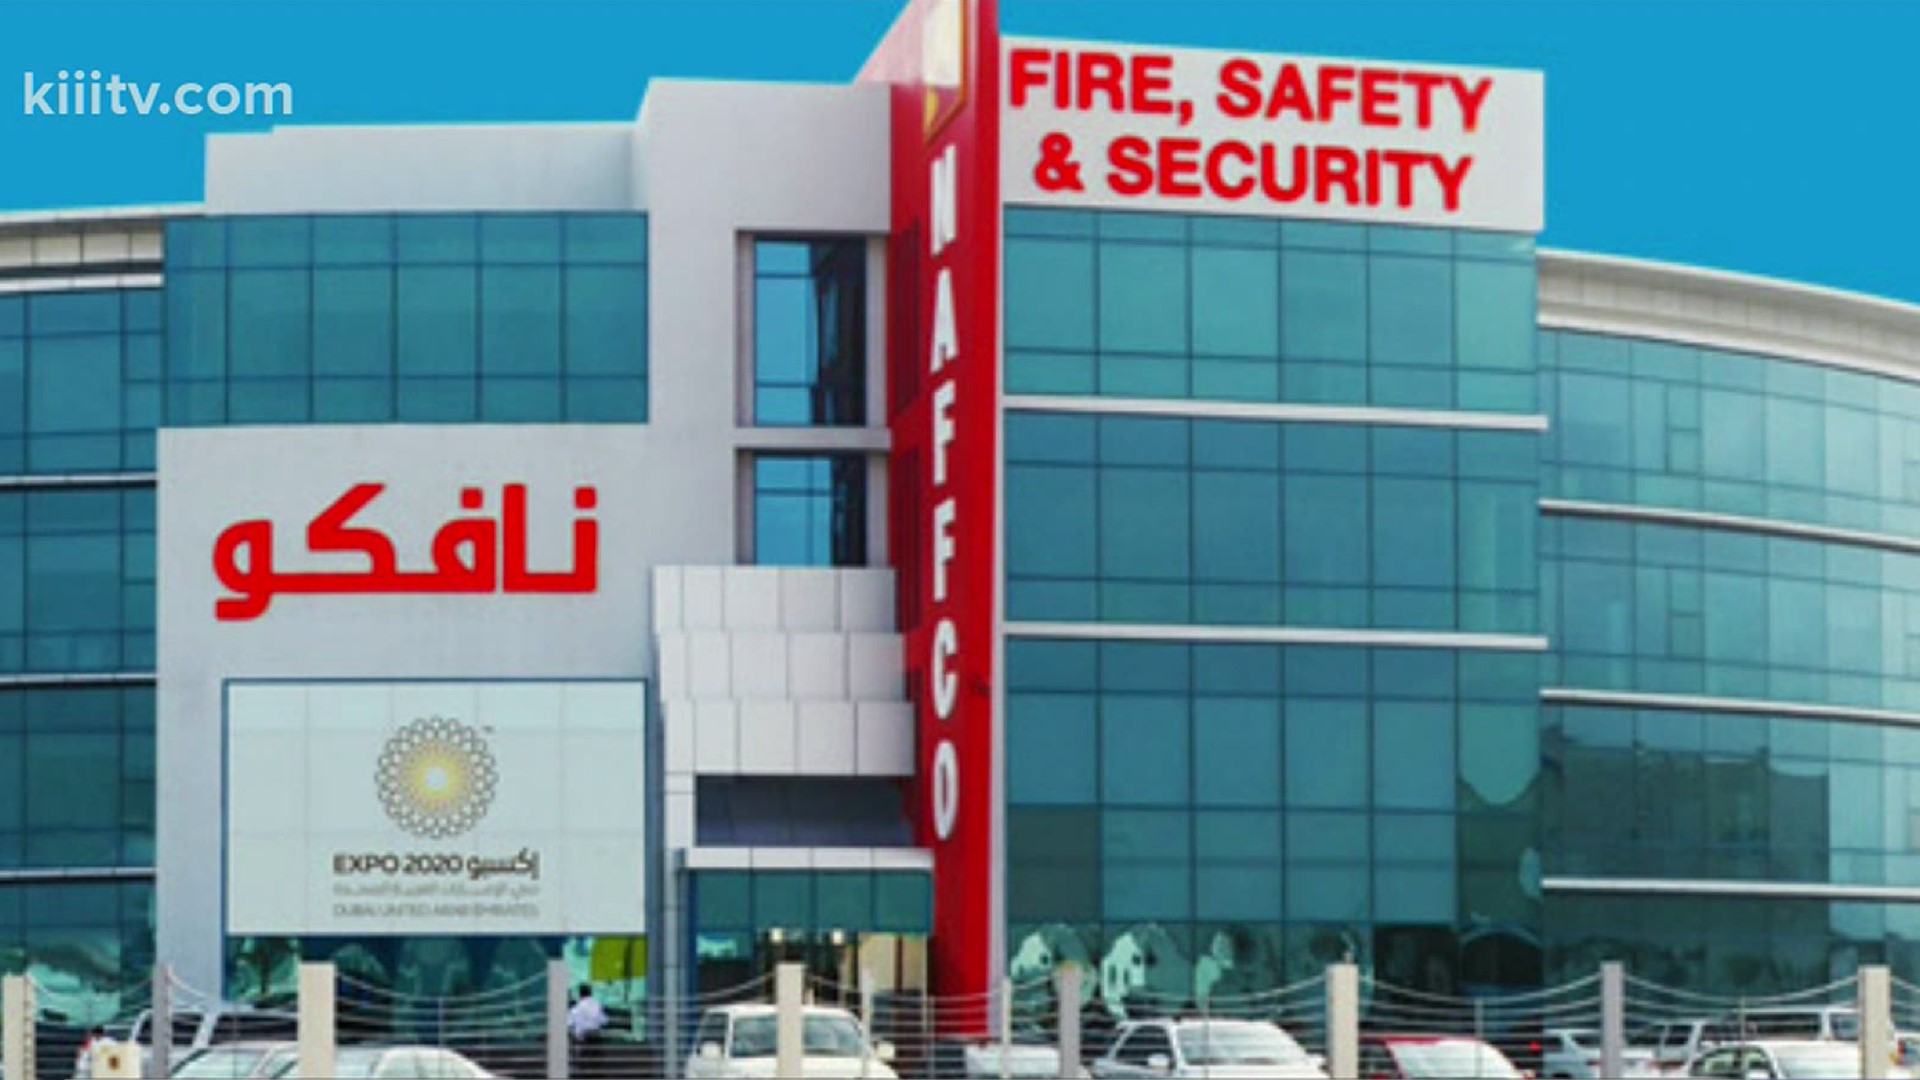 National Fire Fighting Manufacturing is based in Dubai.